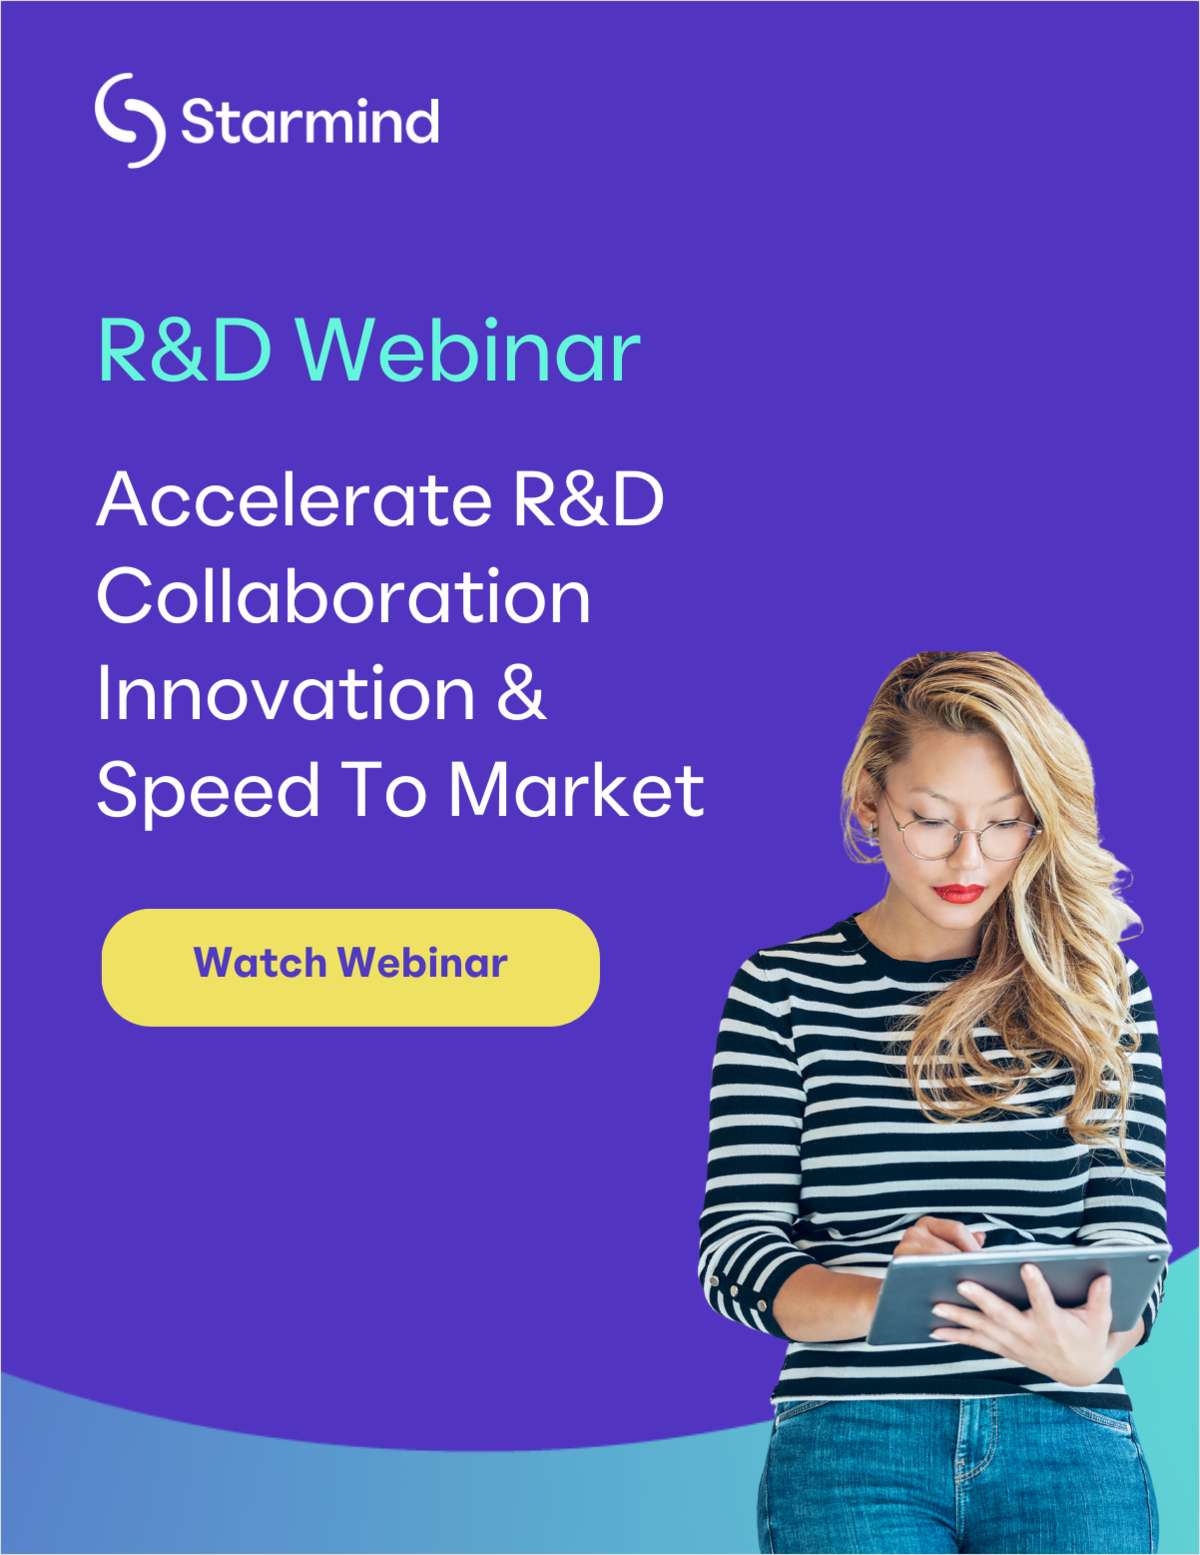 Accelerating R&D Collaboration and Innovation in the Enterprise